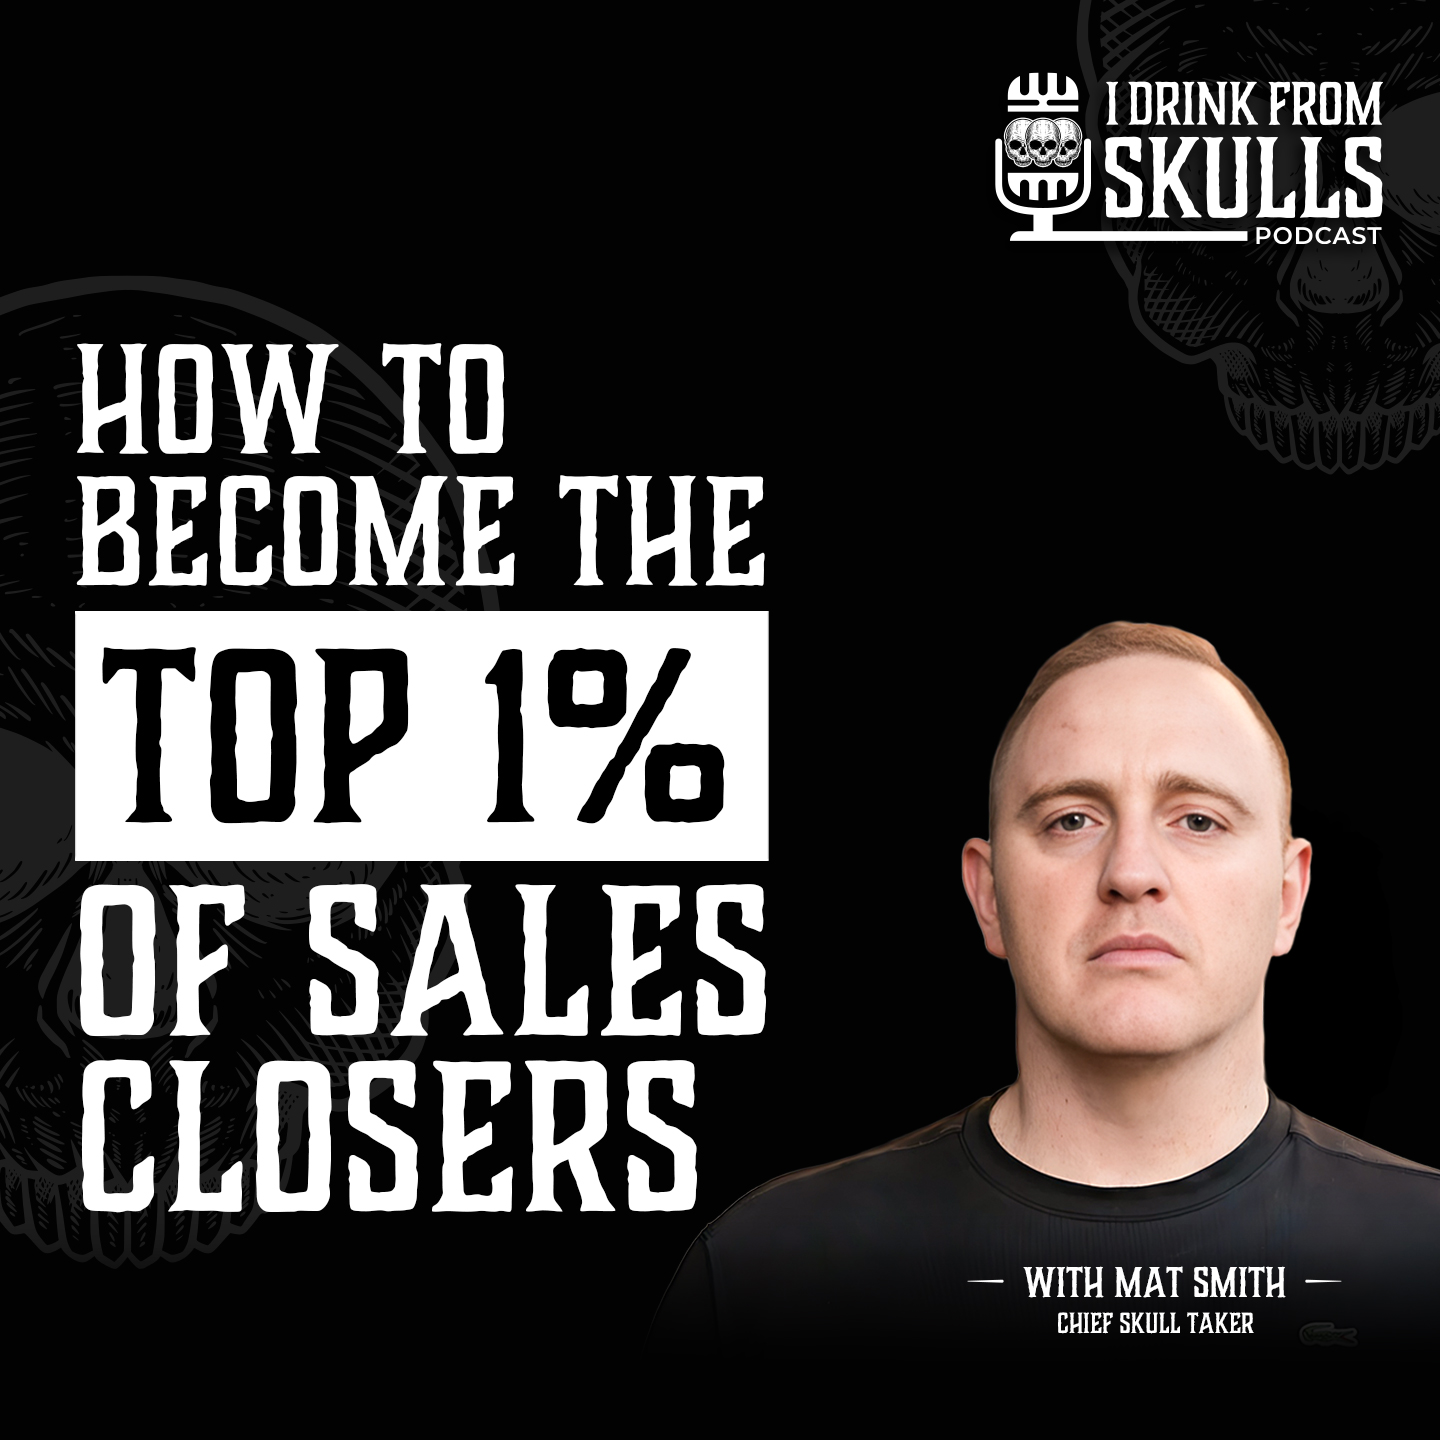 How To Become The Top 1% Of Sales Closers